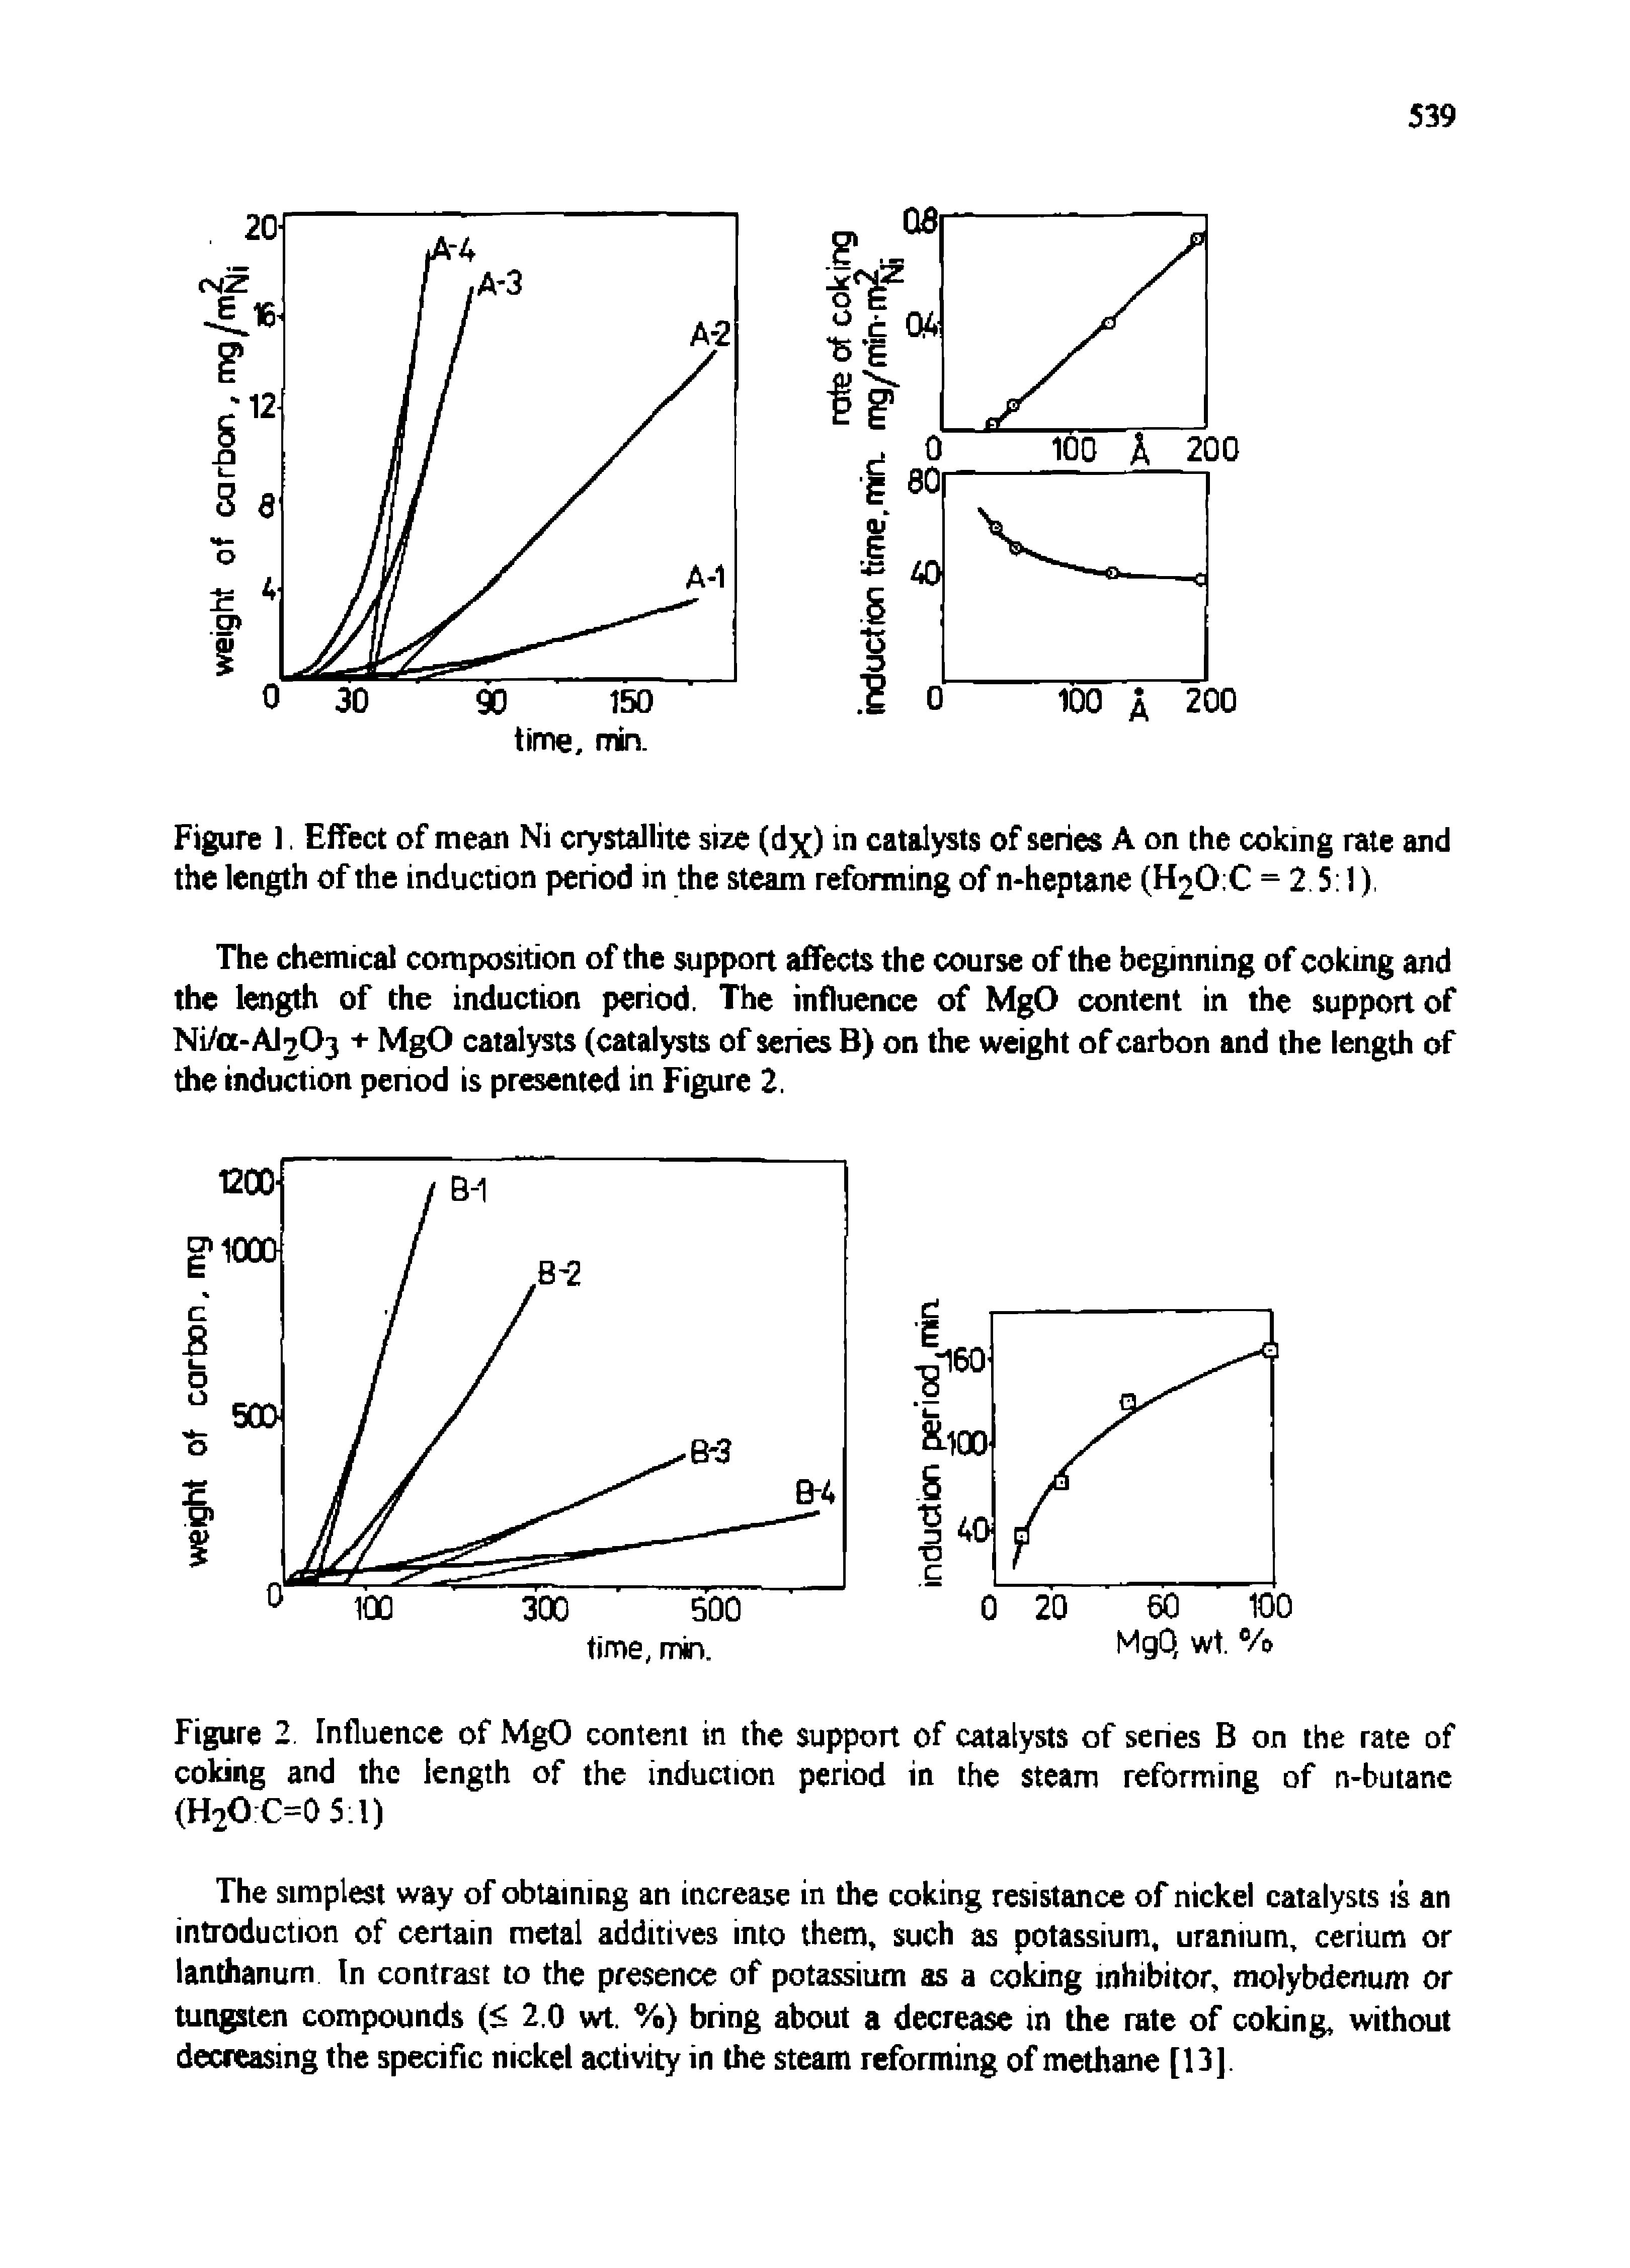 Figure 2 Influence of MgO content in the support of catalysts of senes B on the rate of coking and the length of the induction period in the steam reforming of n-butane (H2OC=0 5 1)...